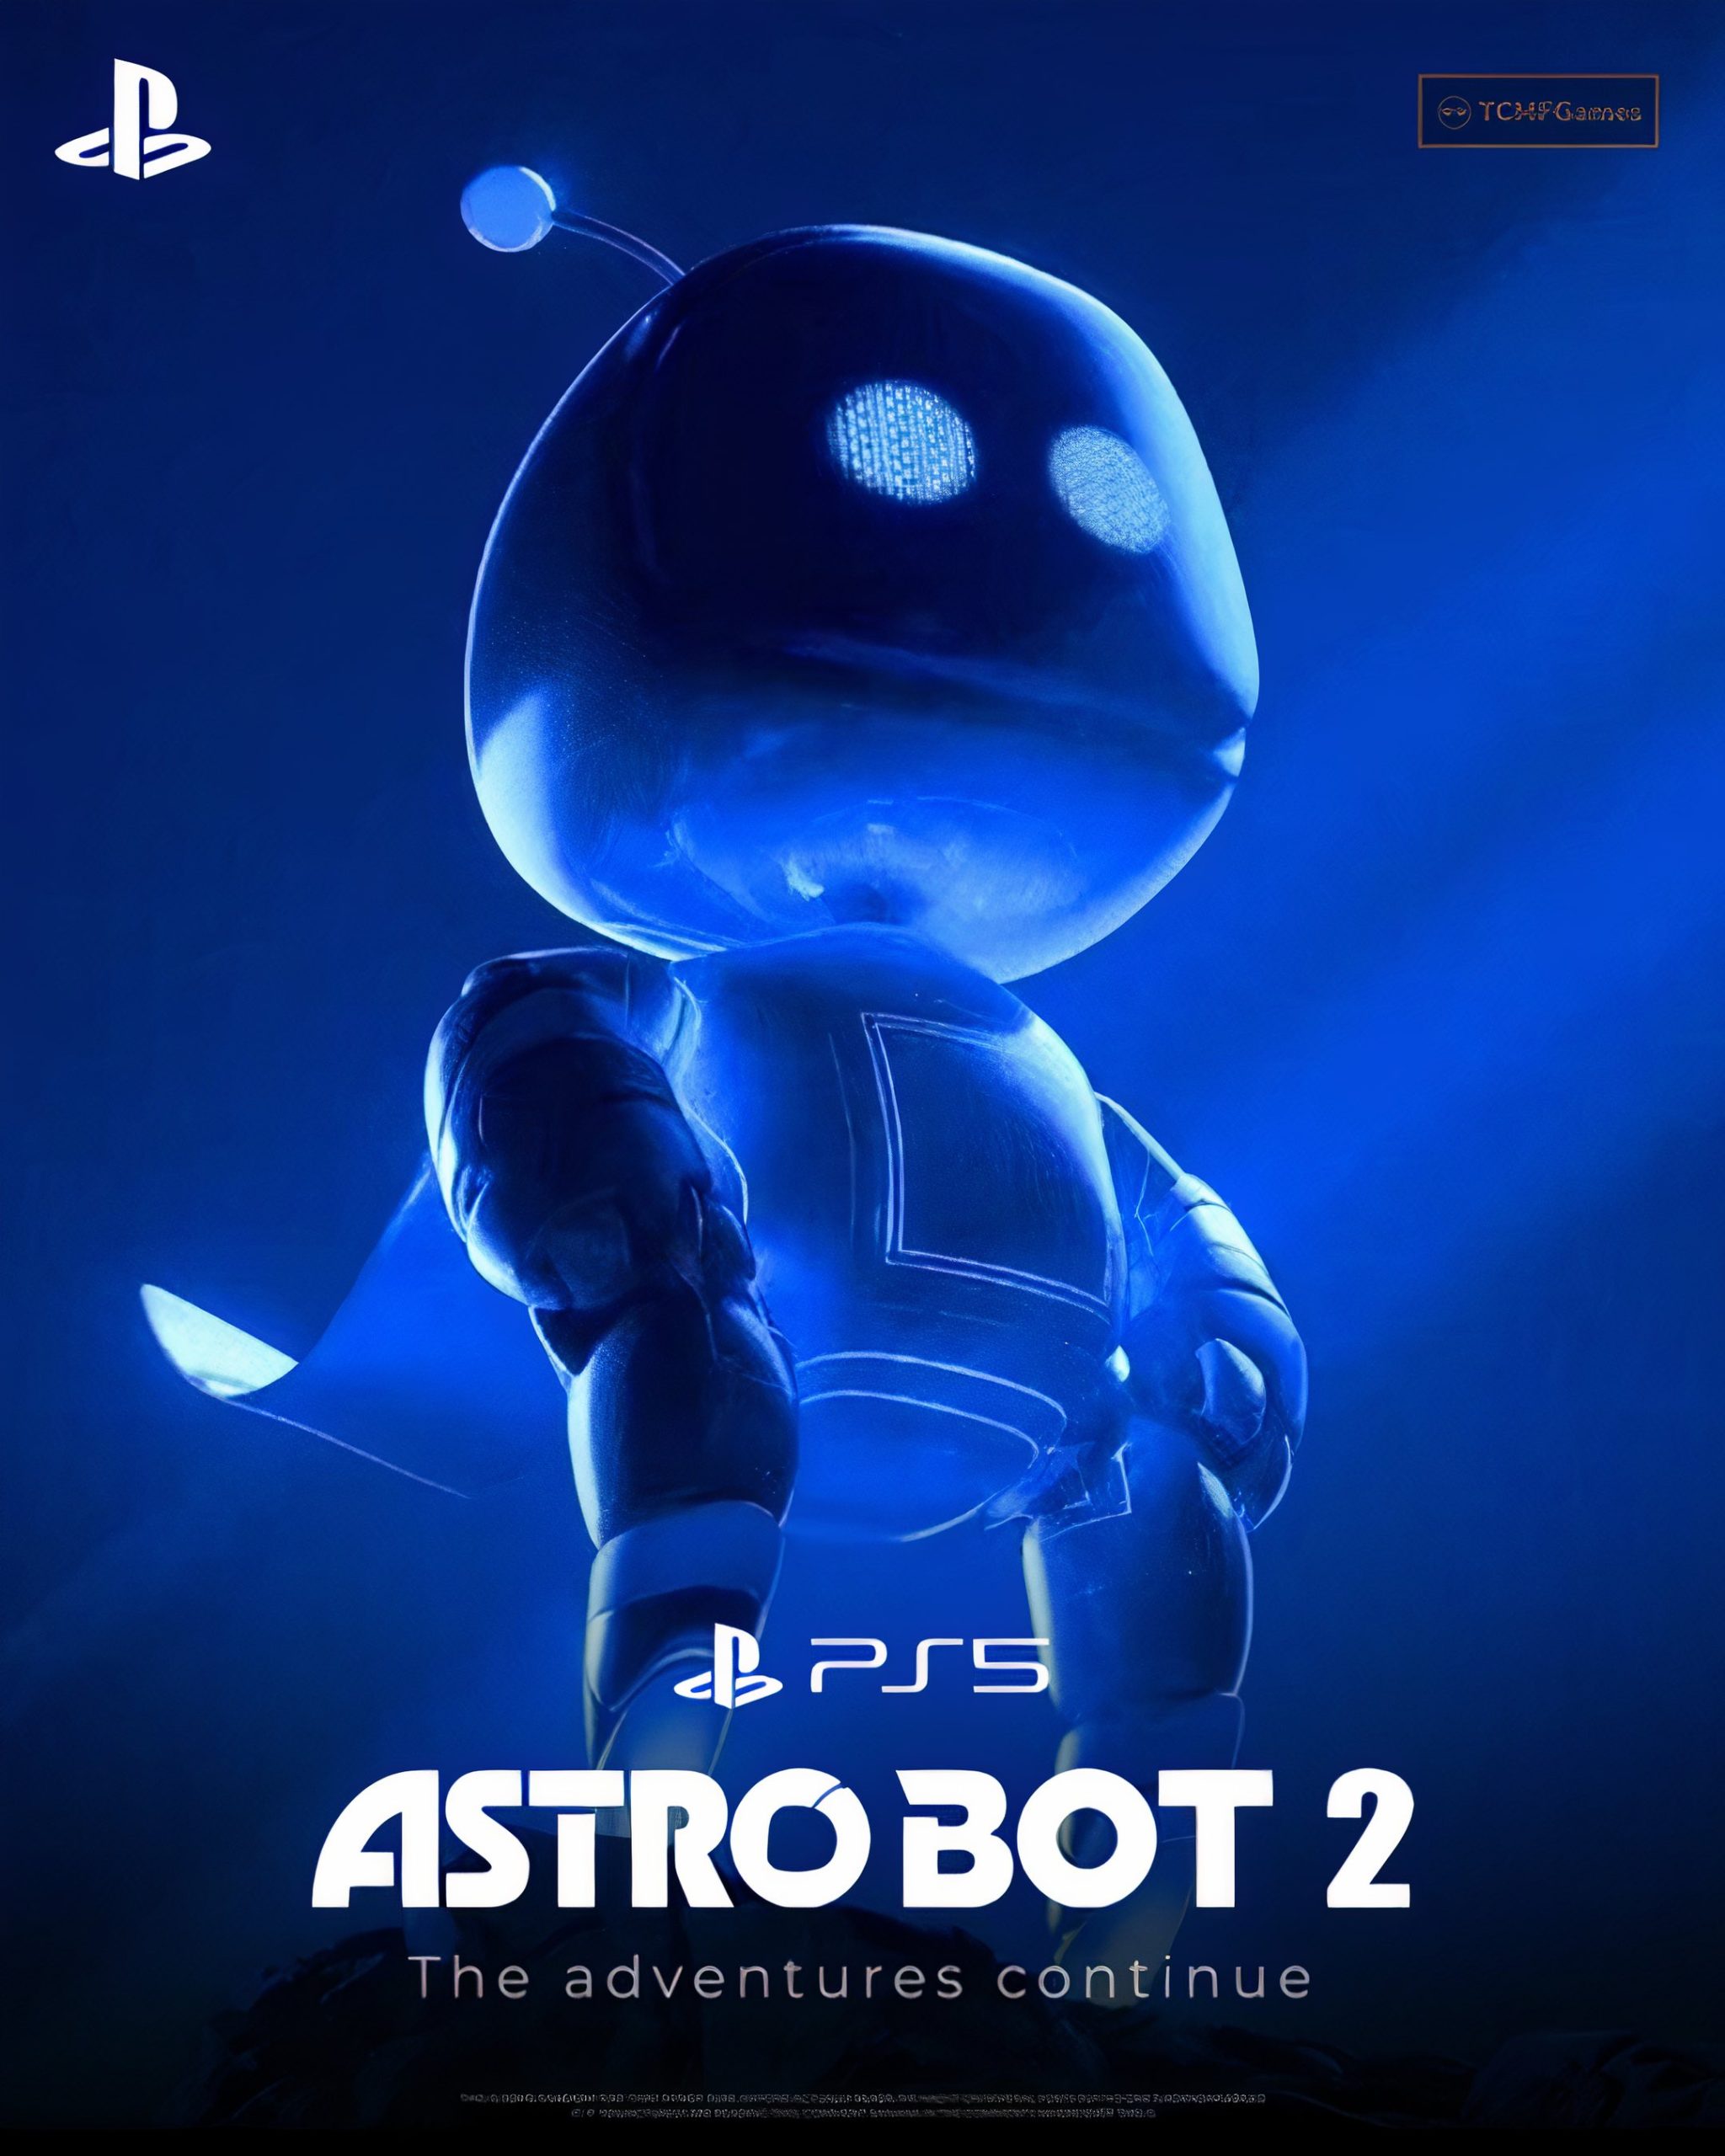 Rumors of a New Astro Bot Game for PS5 Spark Excitement